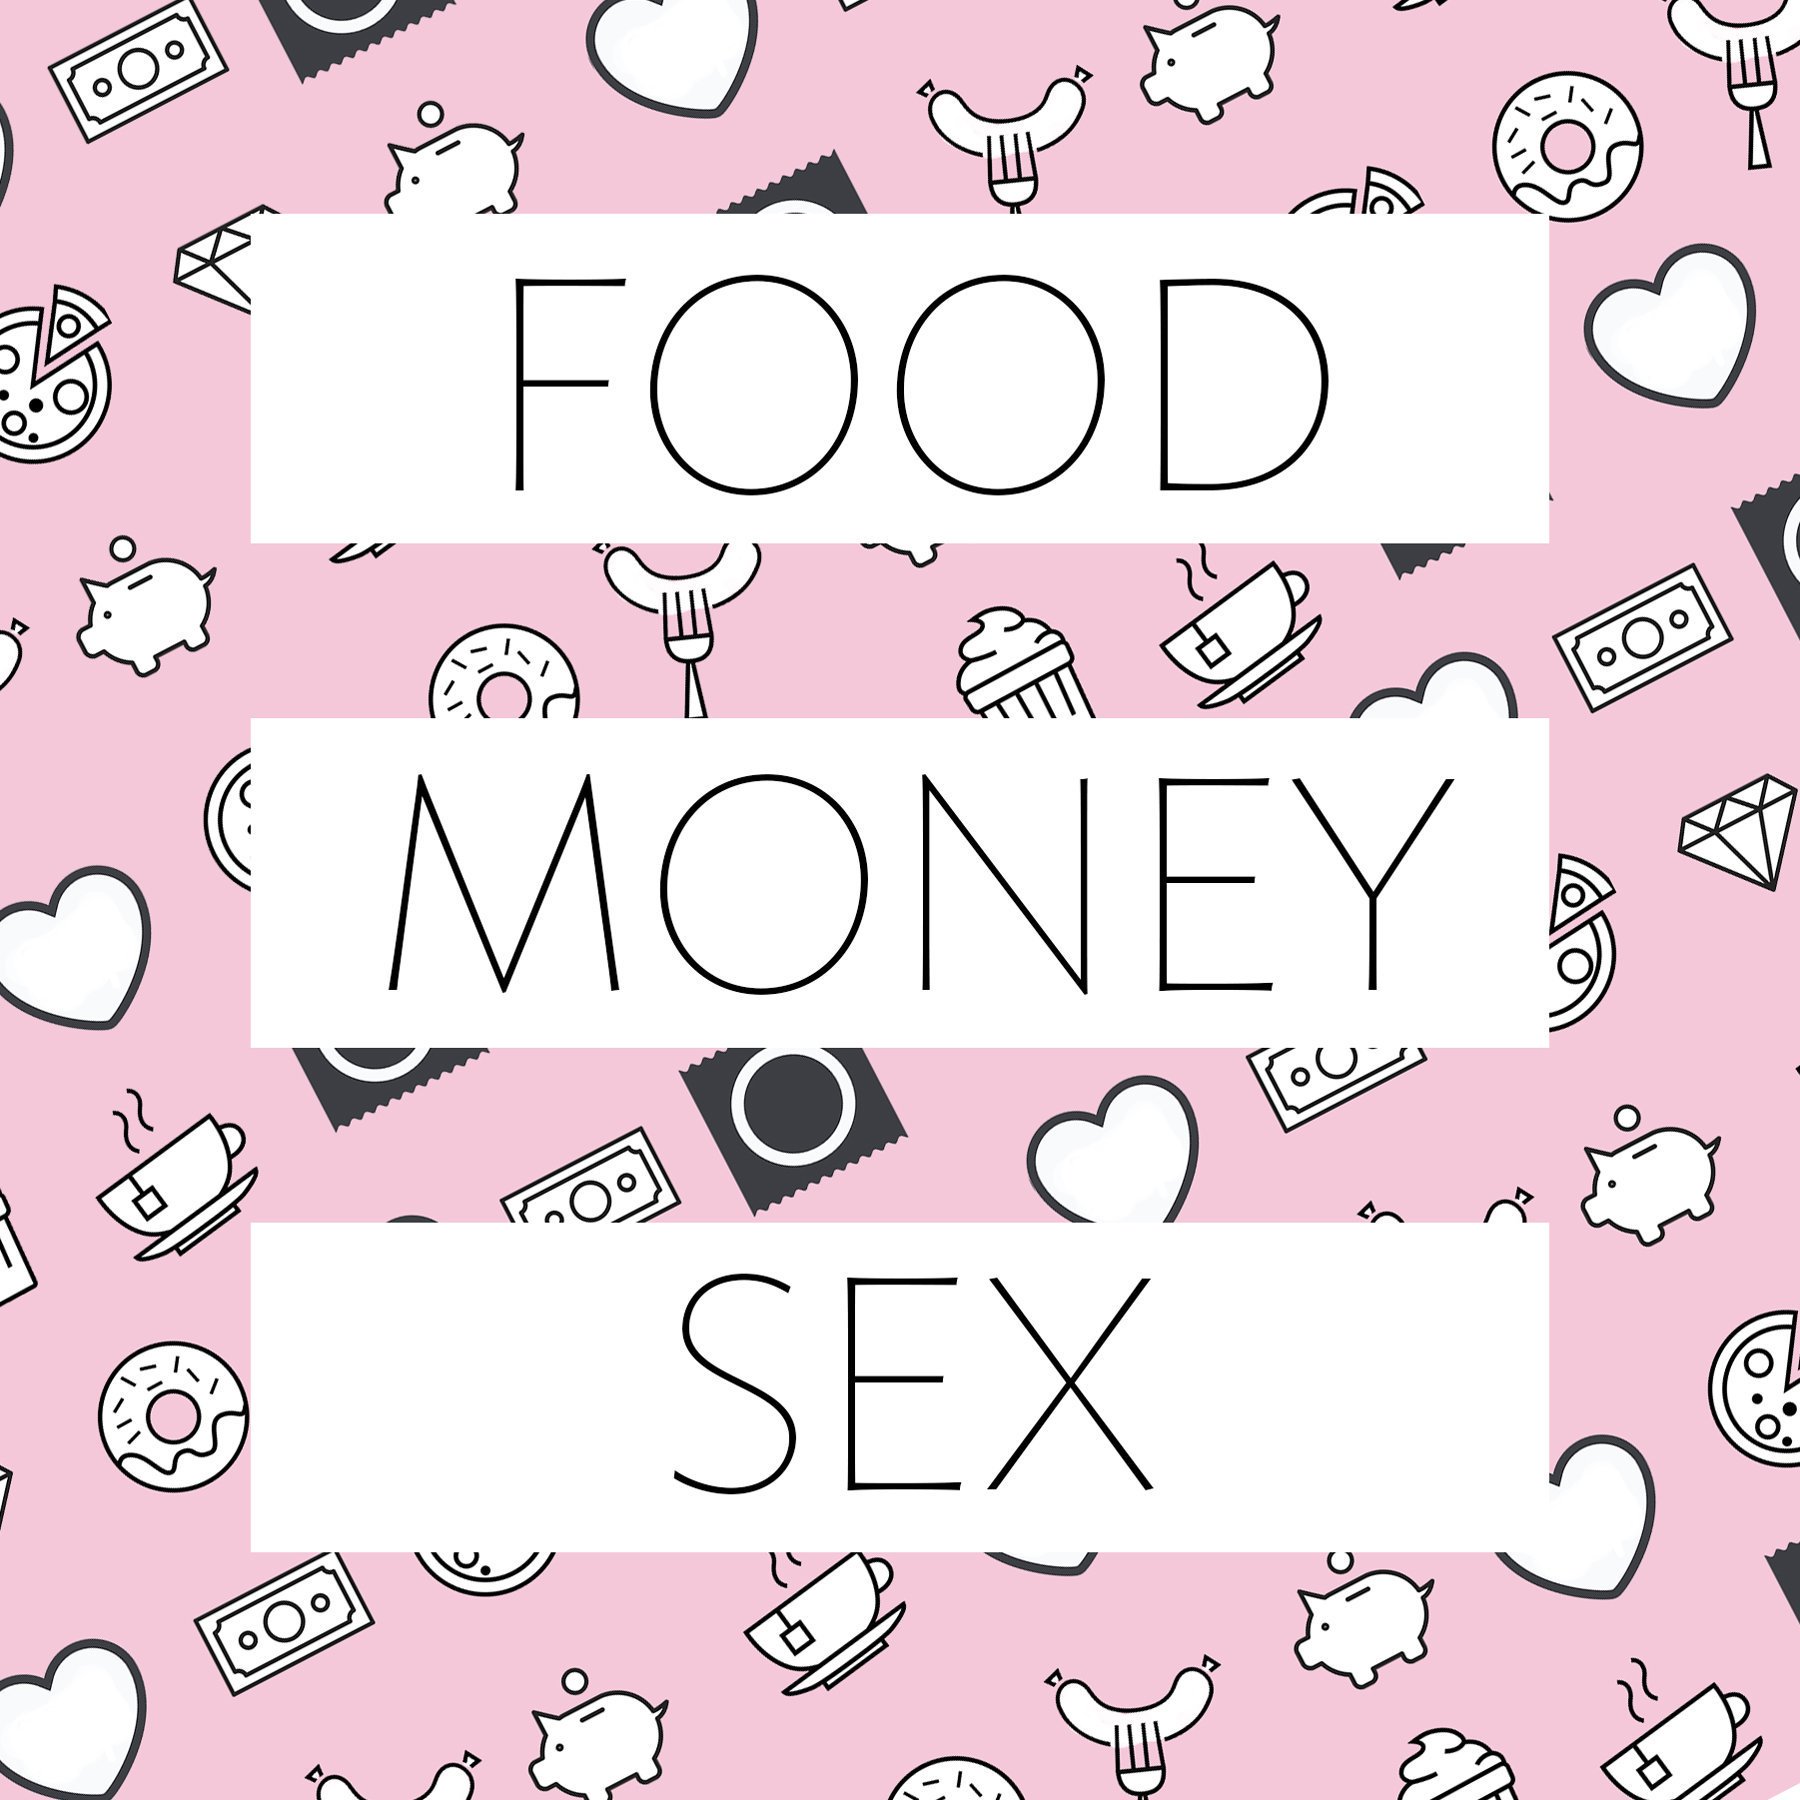 Food Money Sex A 50-Year-Old Who Hides Beer in Her Tumbler During Video Calls, Takes Shrooms With Her Boyfriend, and Watches Tiger King